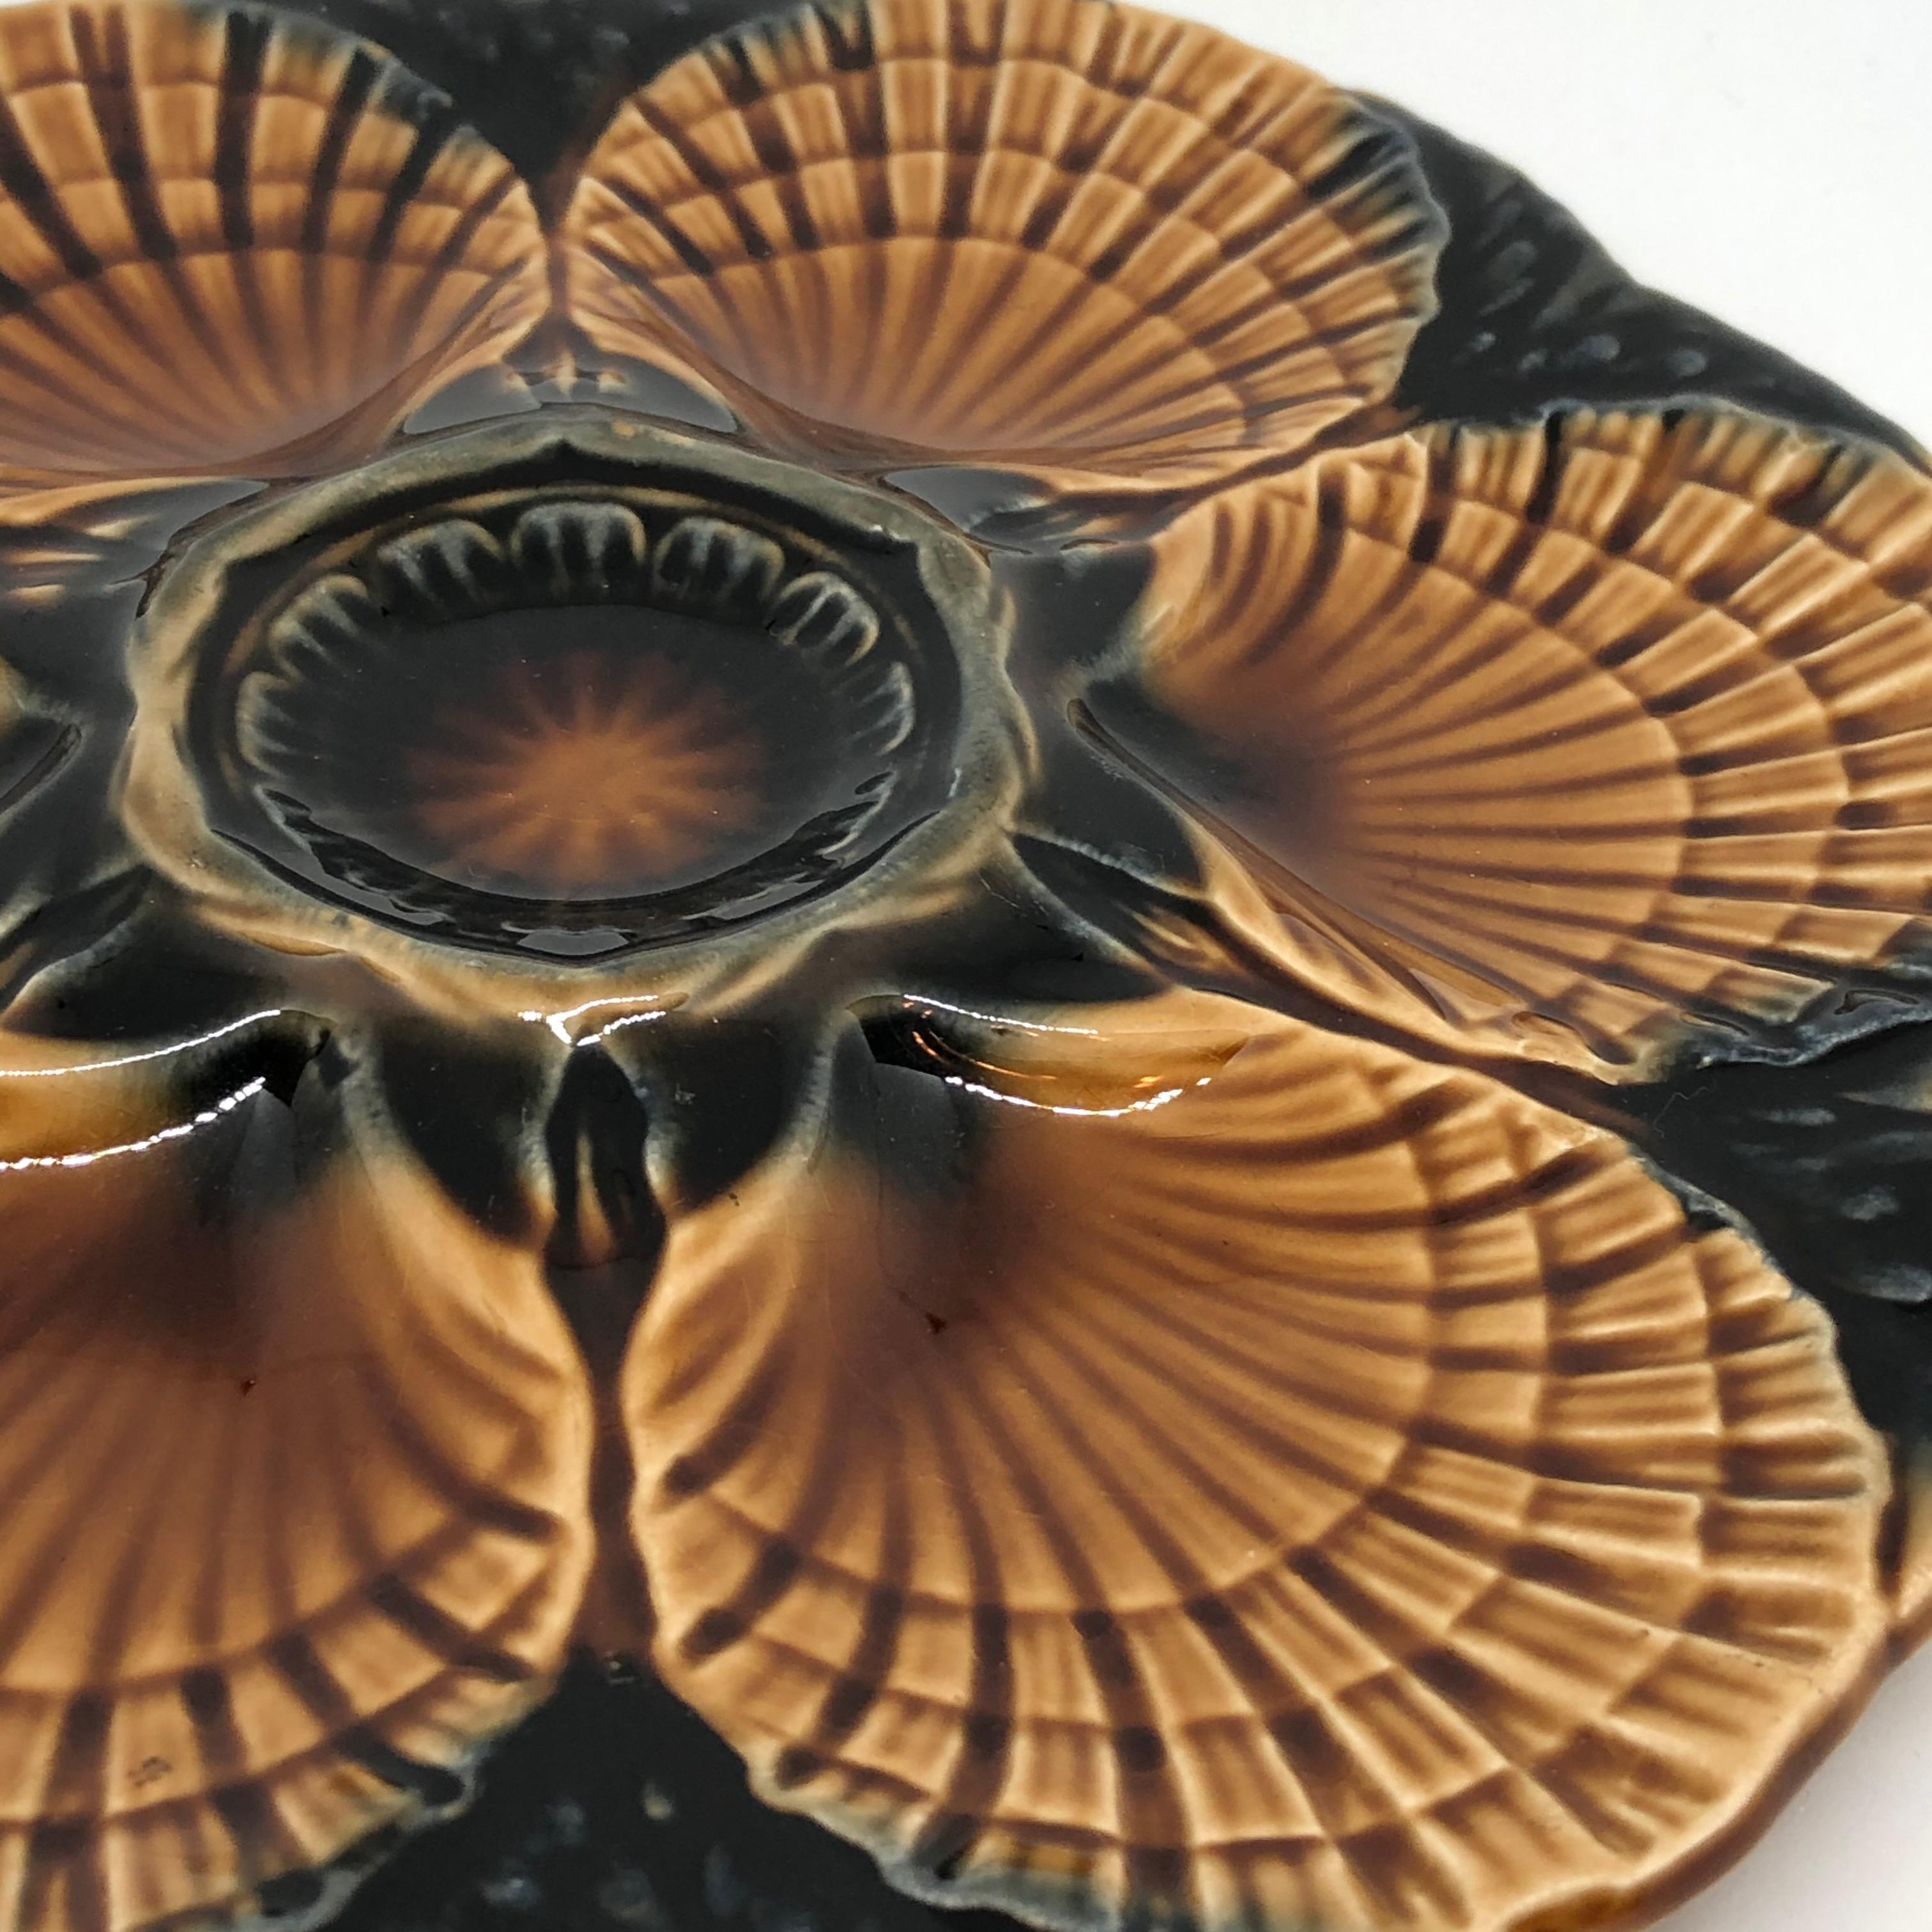 Mid-20th Century Oyster Plate French Vintage Ceramic Faience Sarreguemines, France, 1940s